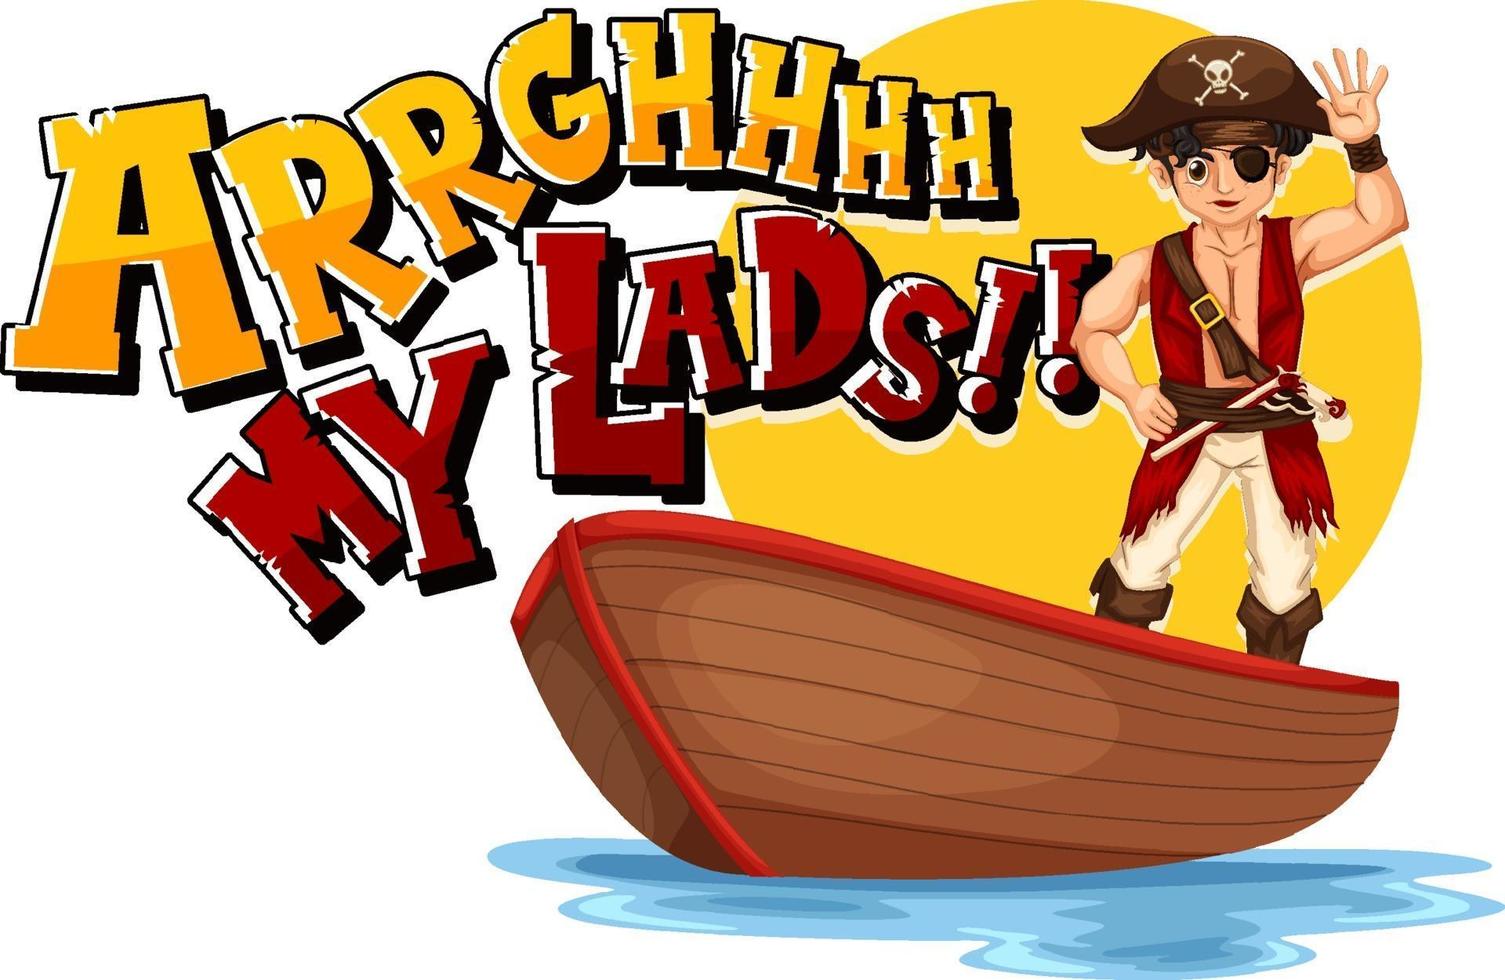 Pirate slang concept with Arrgh My Lads phrase and a pirate vector